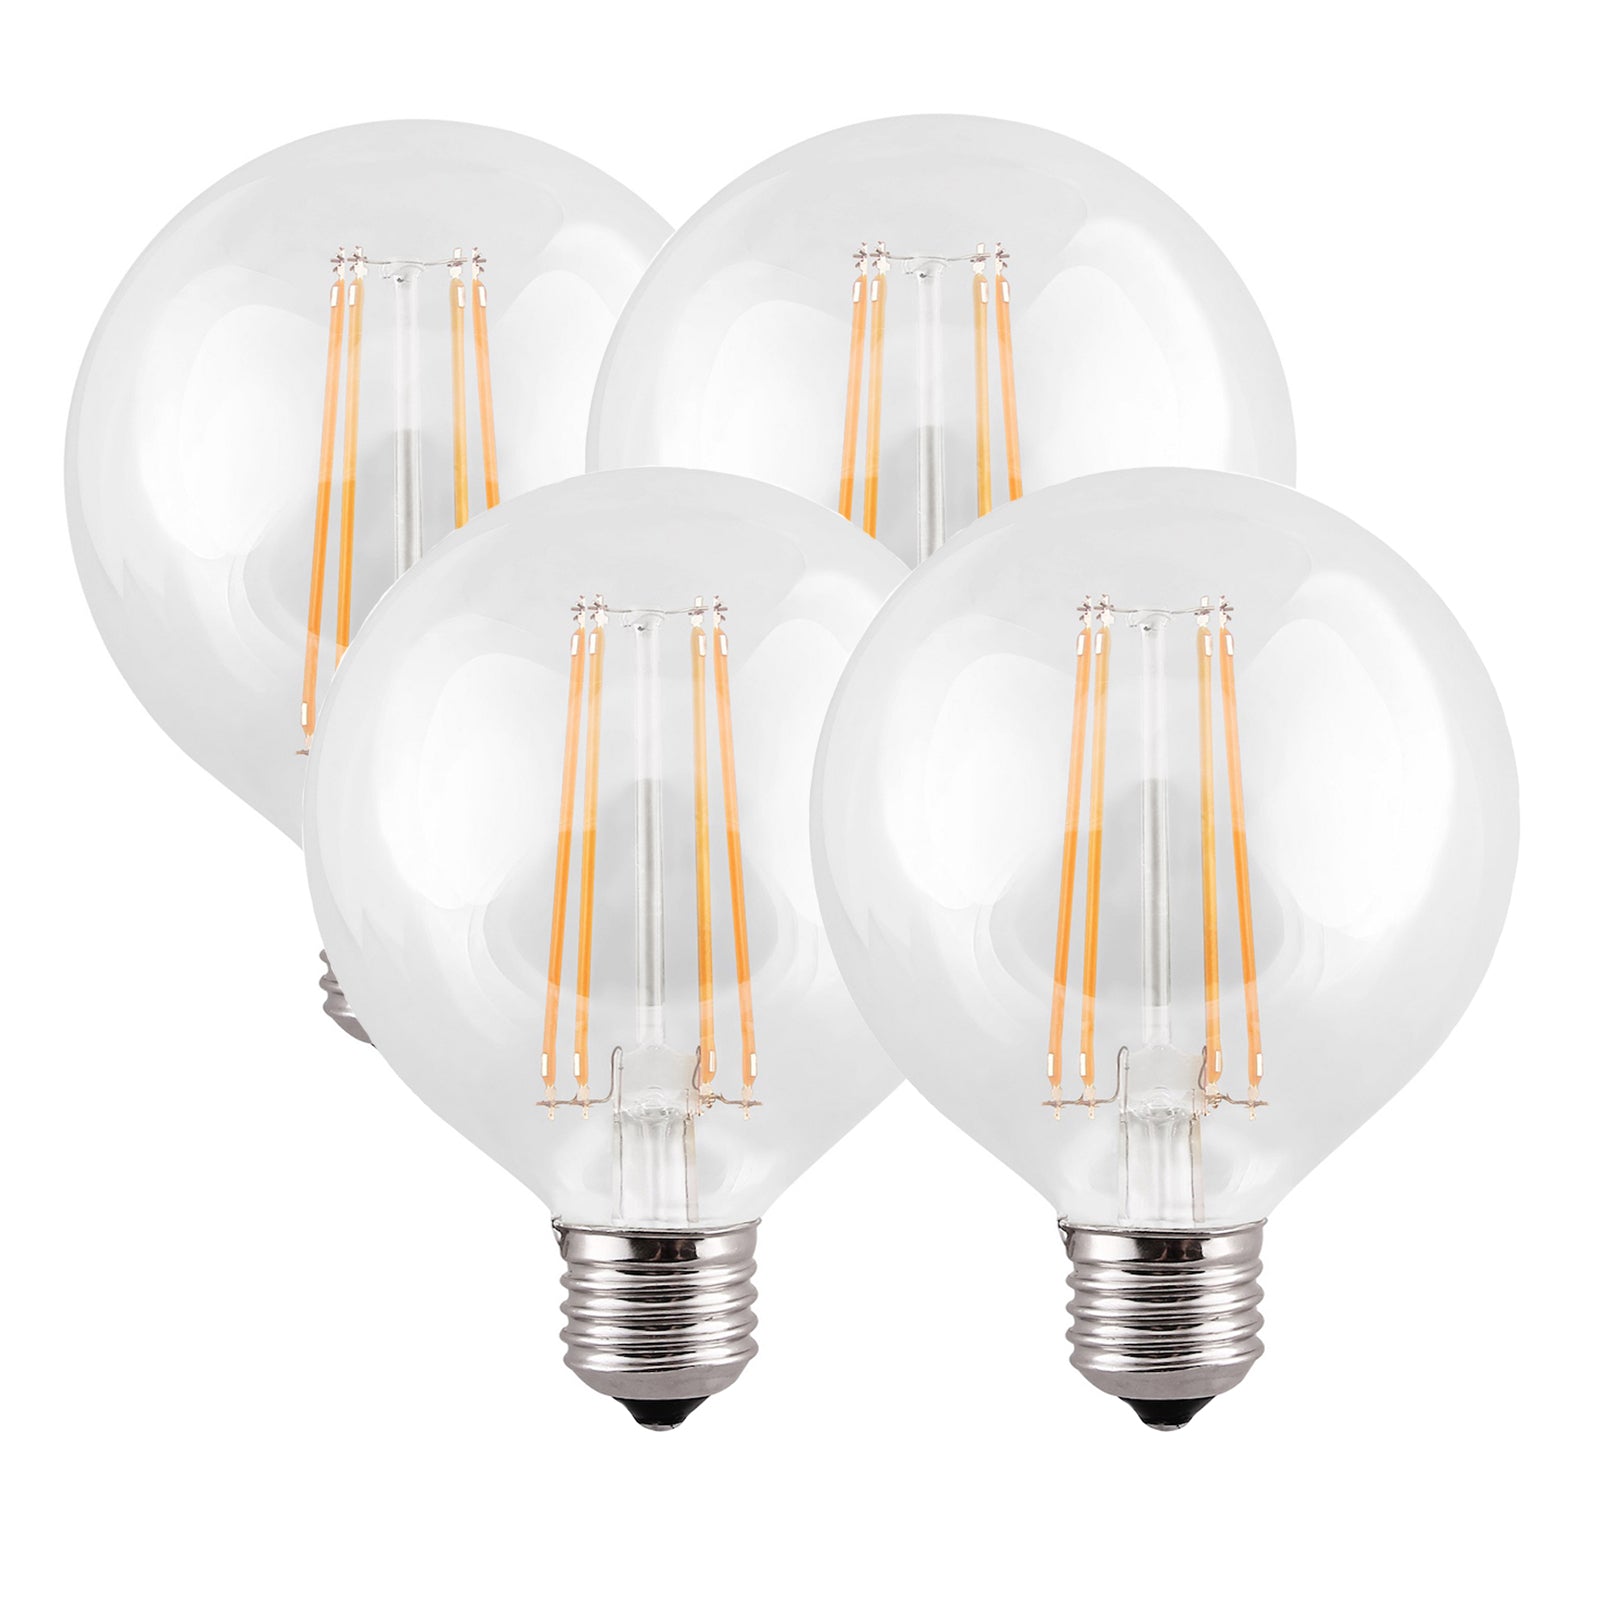 Harper Living G95 8W Clear Glass Warm White Dimmable Globe LED Bulb, Pack of 4